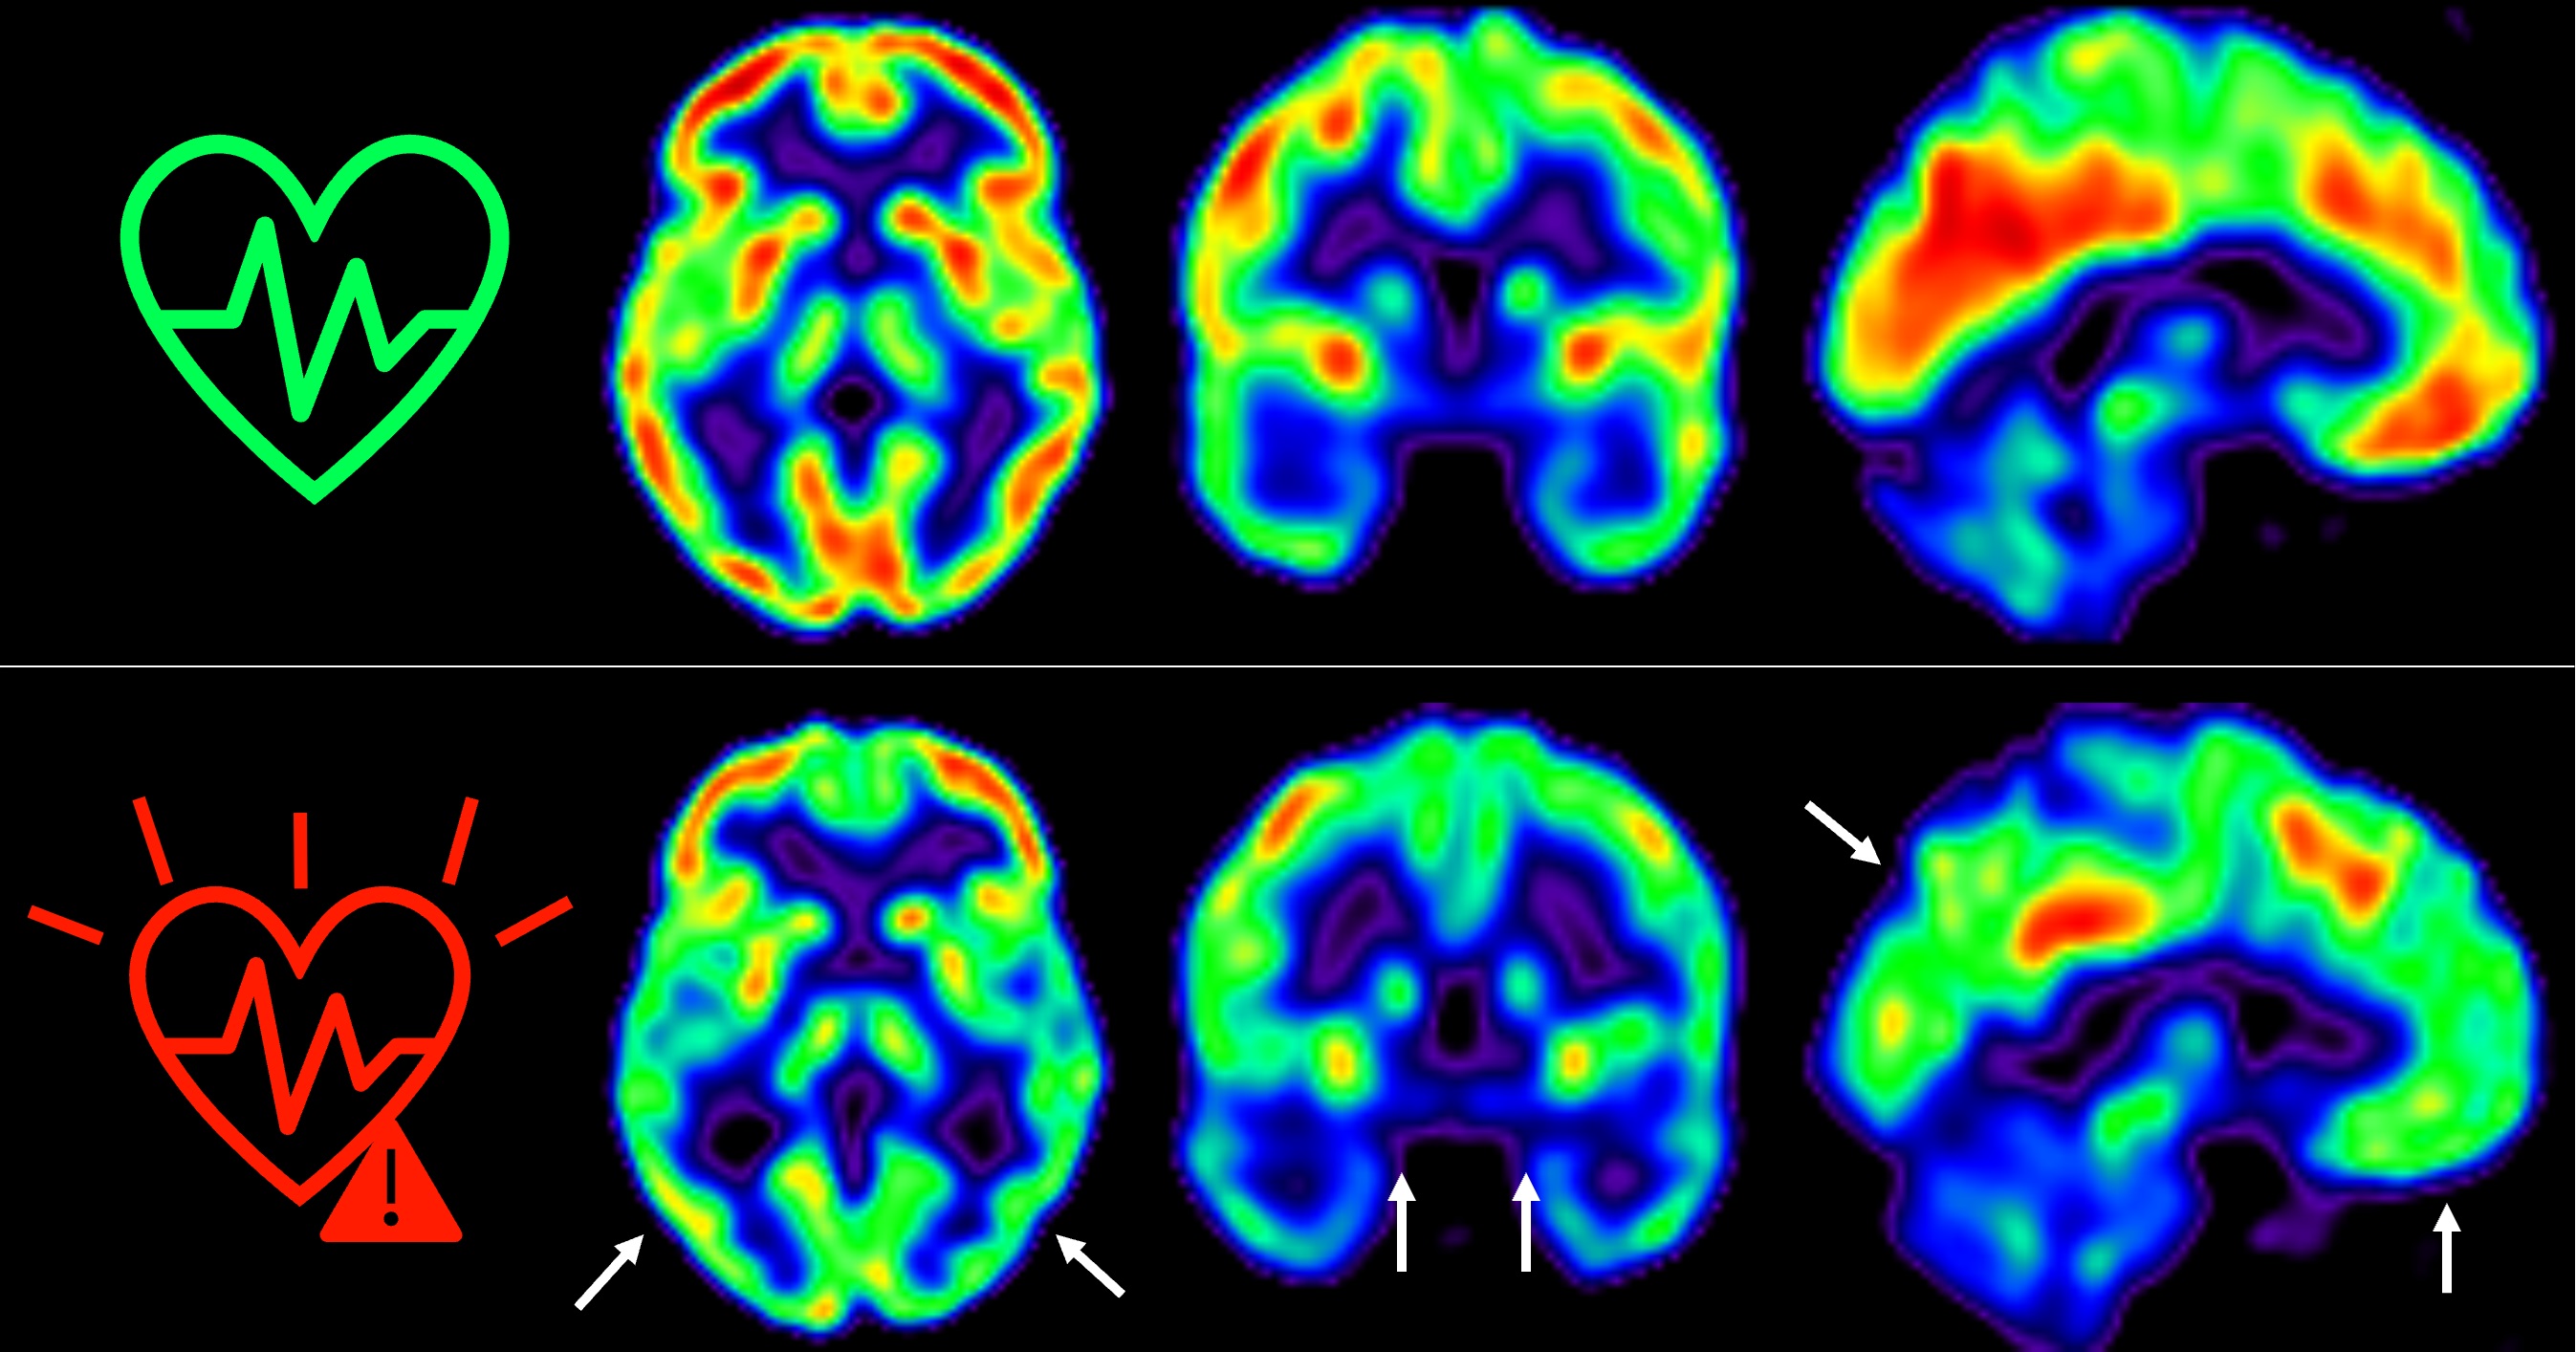 The image represent glucose uptake in the brain measured by positron emission tomography in middle-aged individuals with low (top) or high (bottom) sustained cardiovascular risk over 5 years. The colors represent cerebral glucose consumption, with red indicating higher consumption and blue lower consumption